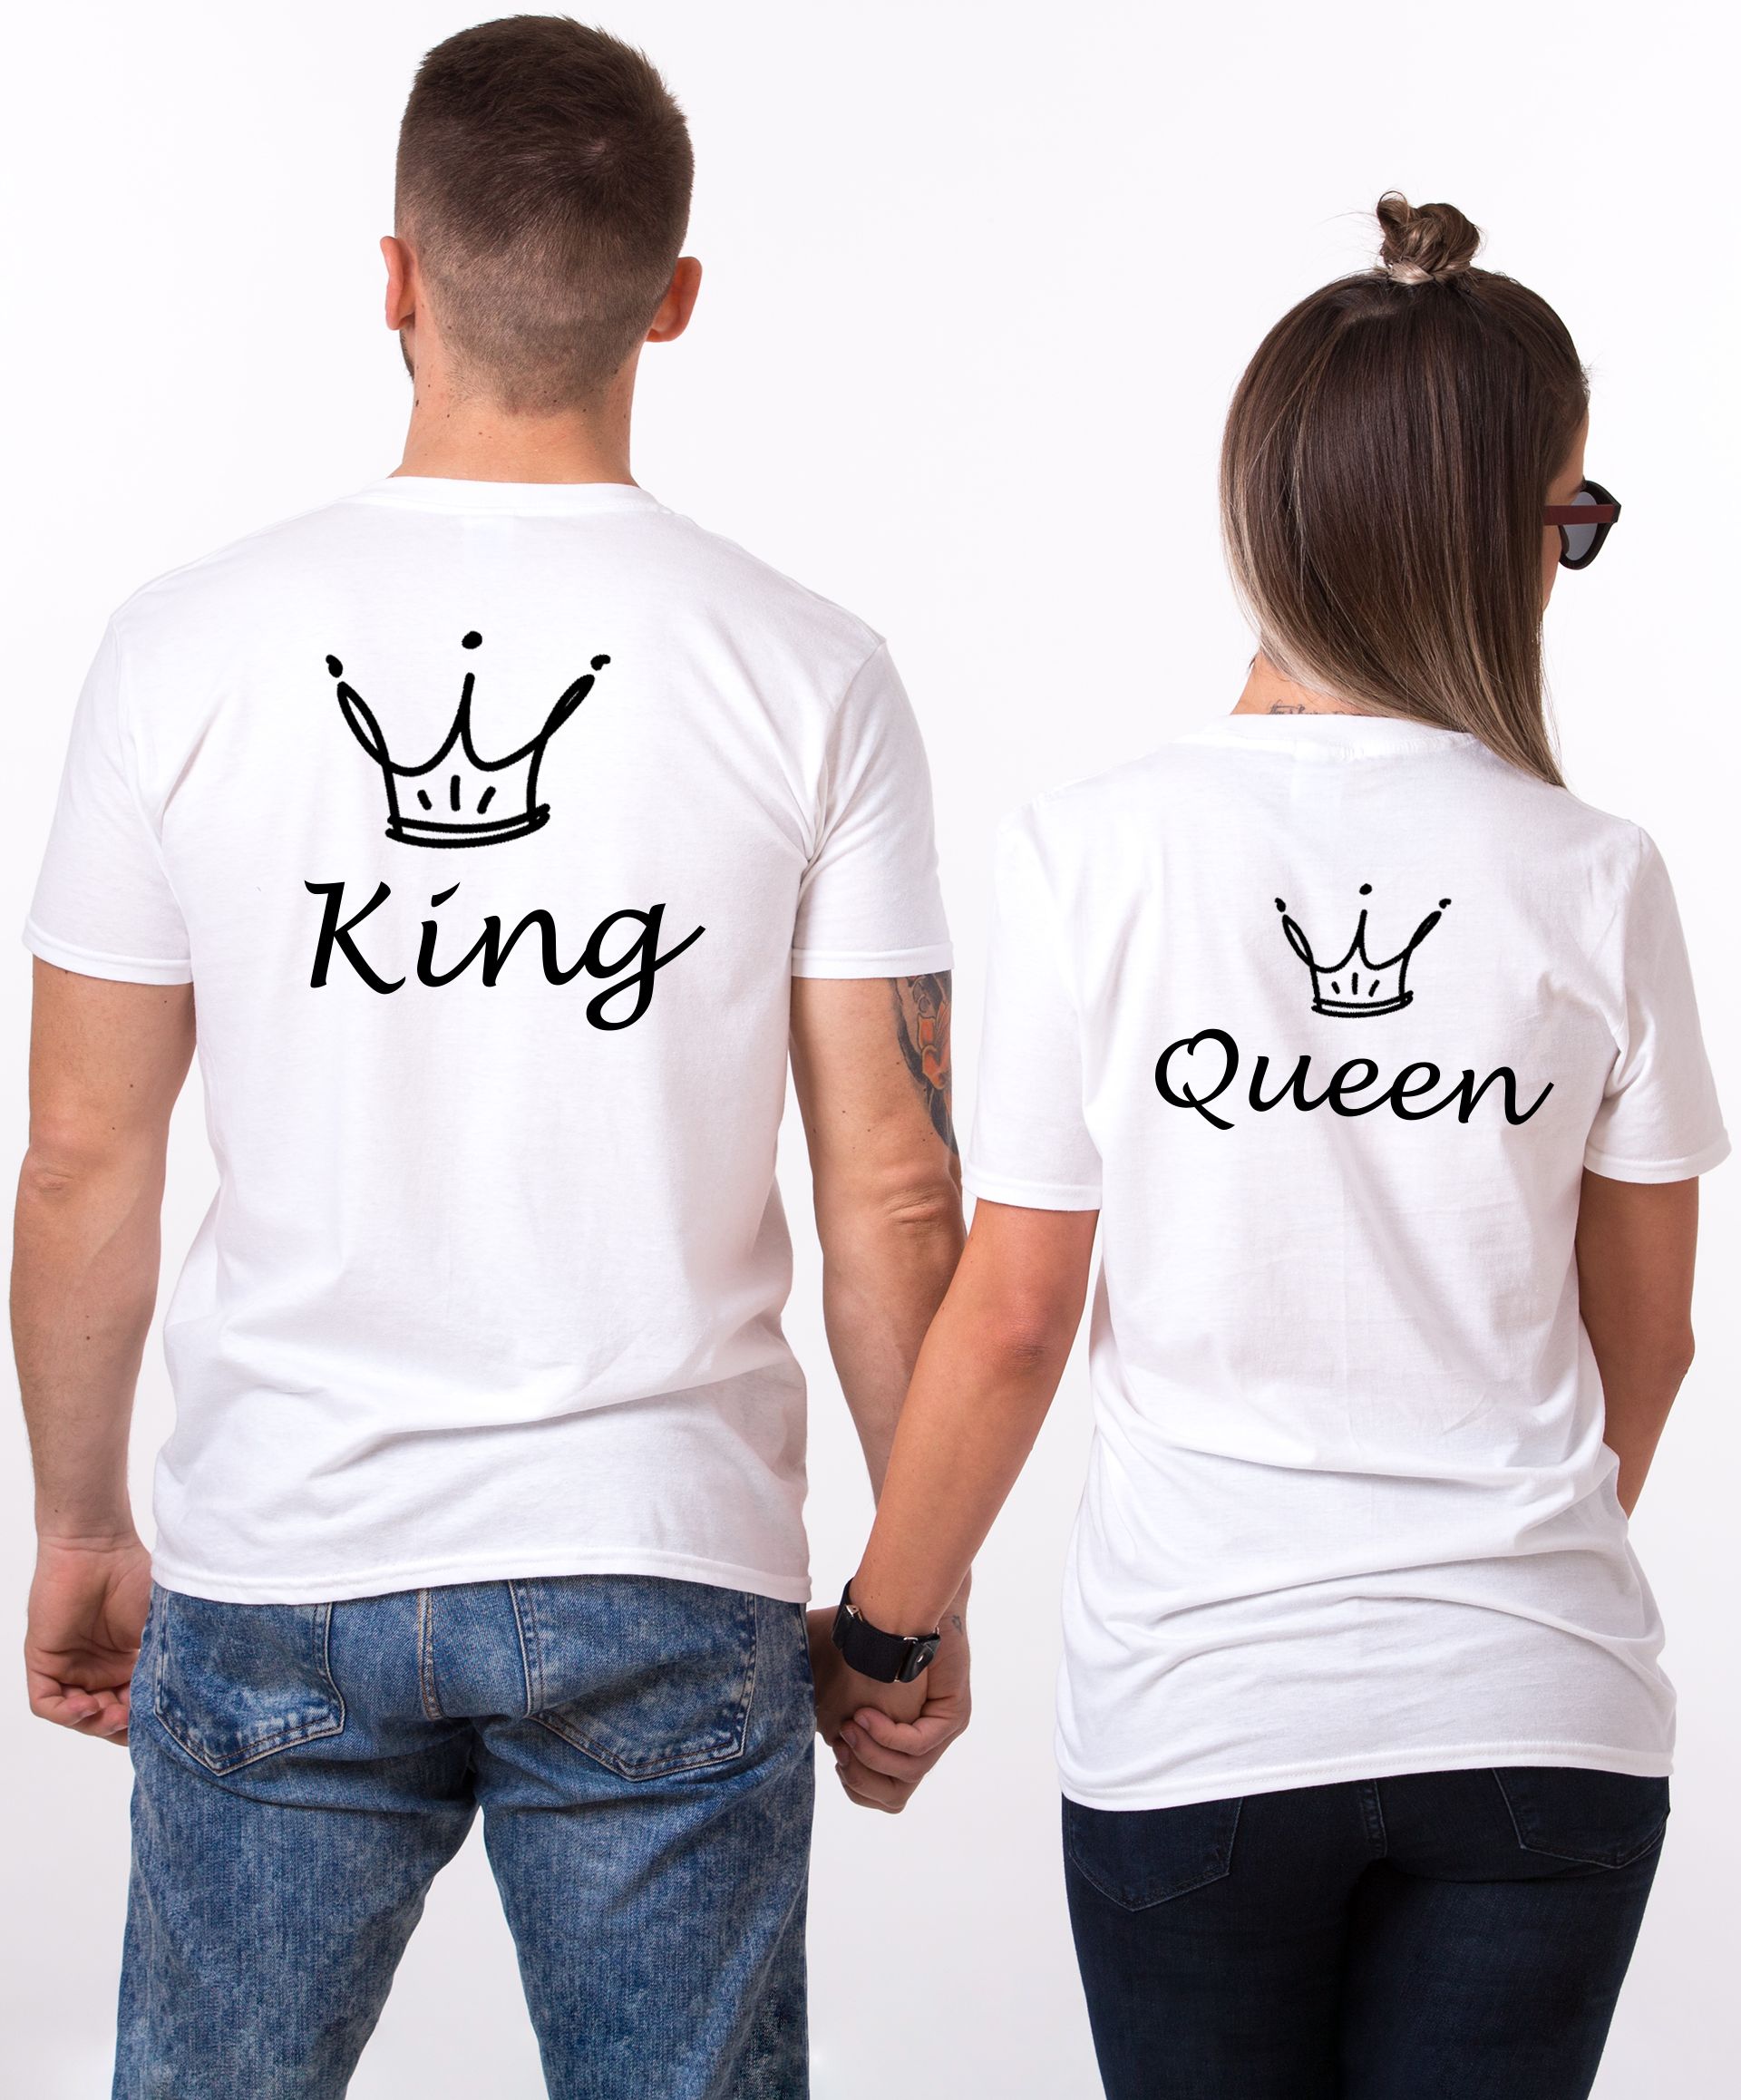 King Queen Crown Shirts, Animated Crowns, Matching Couples Shirts. 